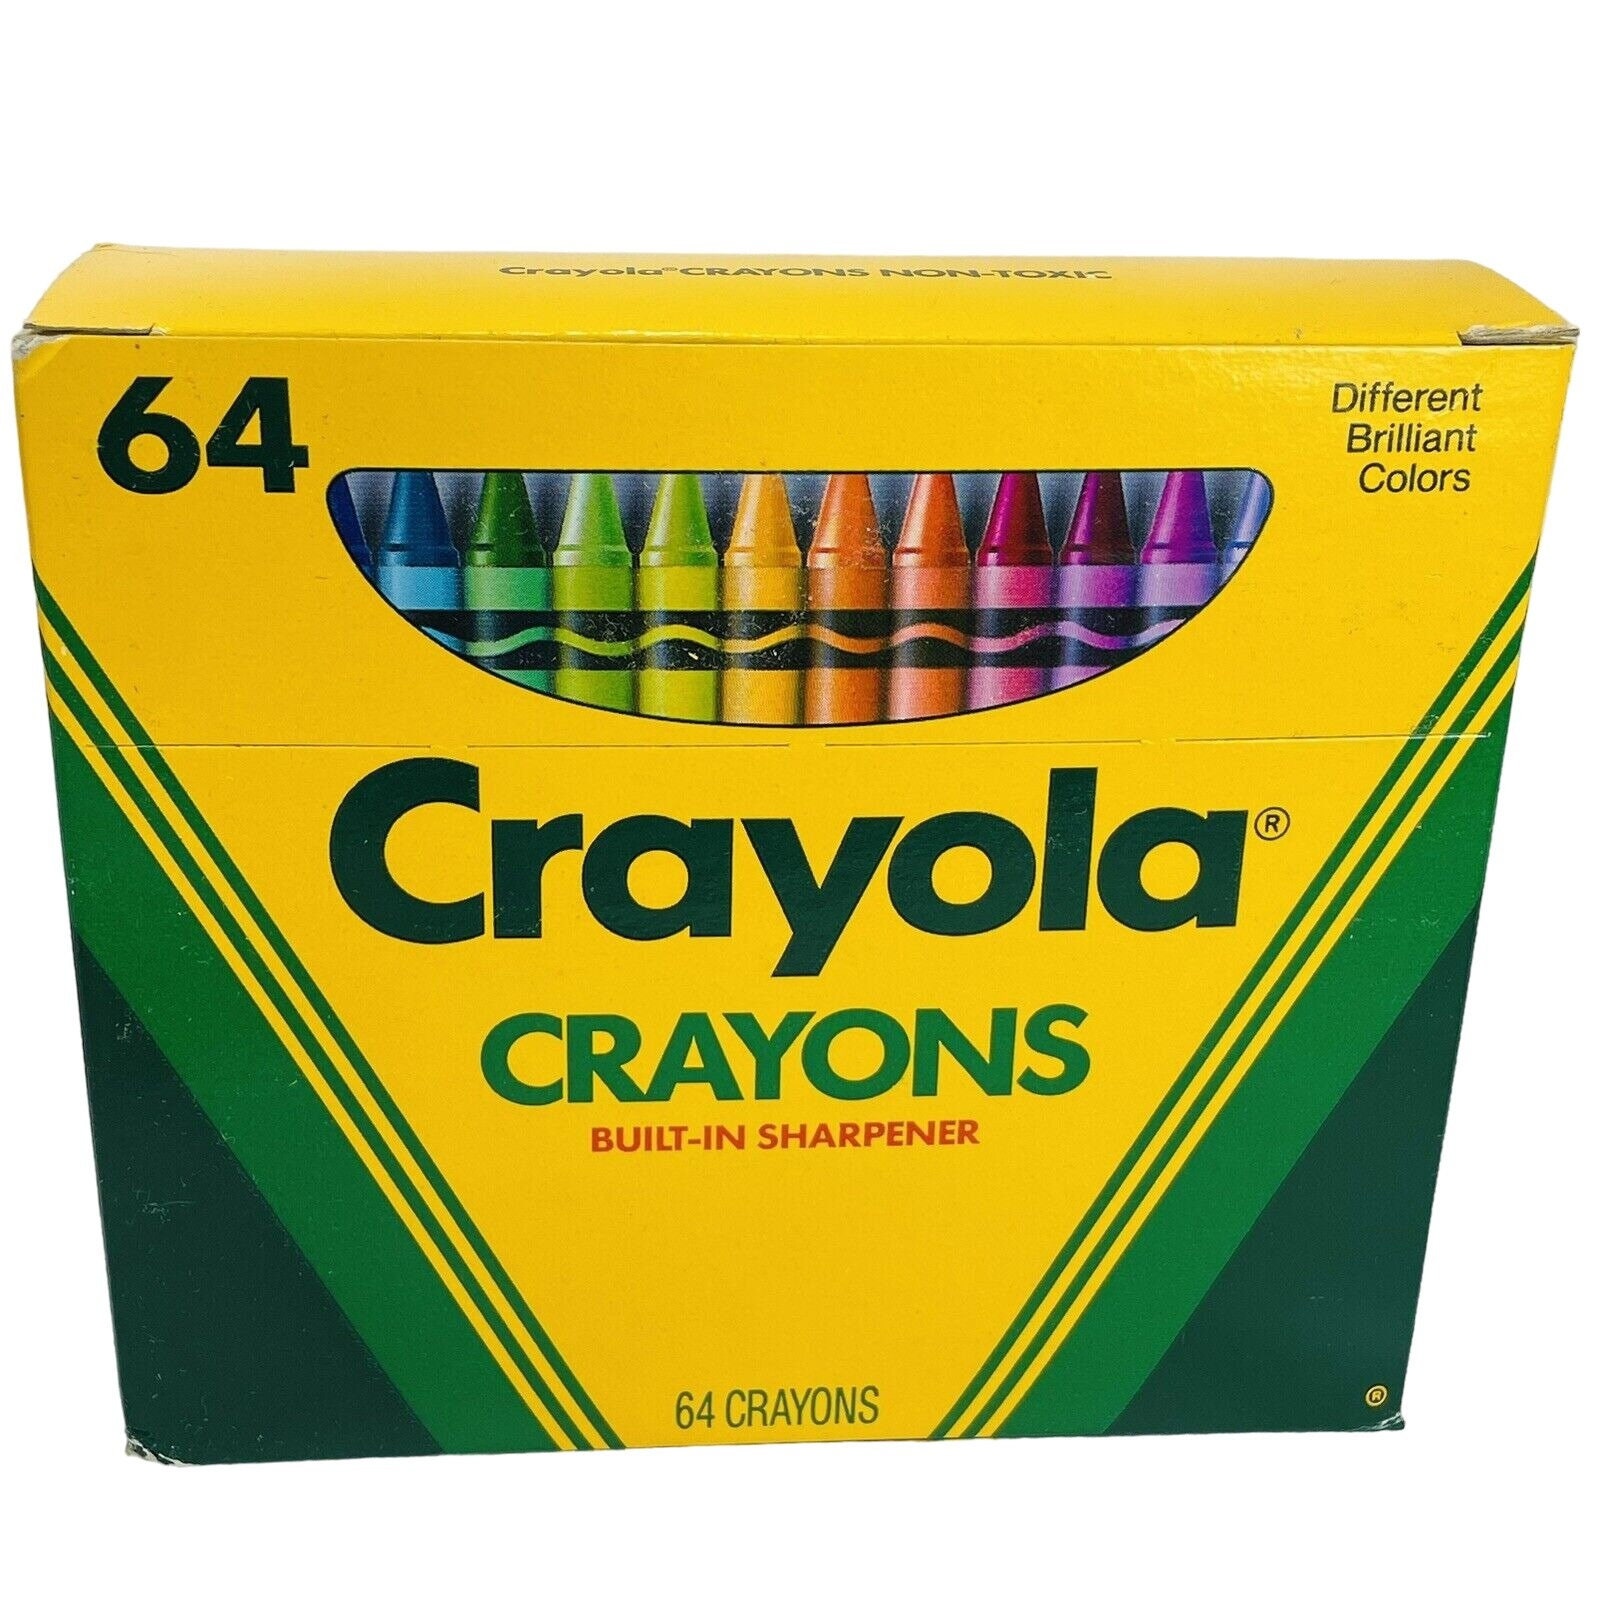 Crayola Crayons Box of 64 With Built in Sharpener, Multi-colored Crayon Set  for Coloring, School Supplies for Kids, Lightly Used -  Norway